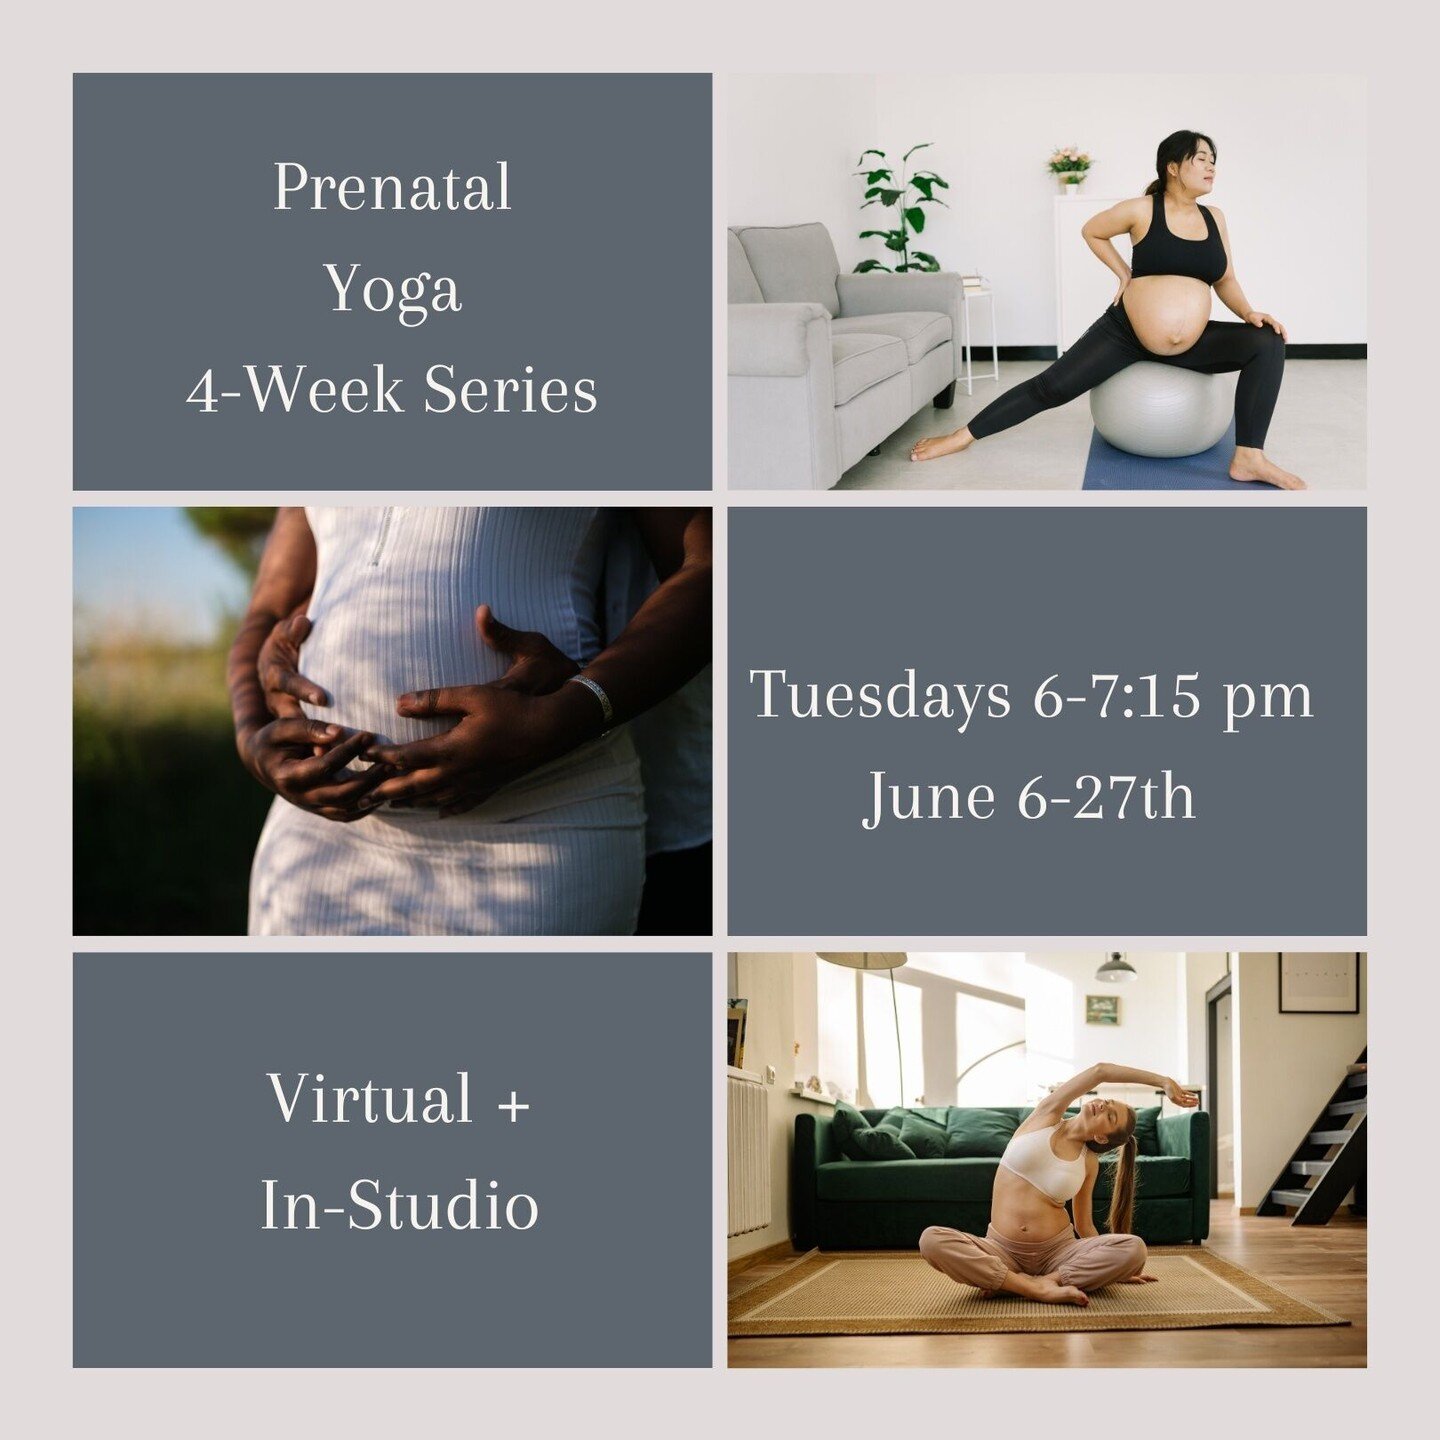 Announcing: Our next Prenatal Yoga Series is 𝟰 𝗰𝗹𝗮𝘀𝘀𝗲𝘀 𝘁𝗼𝘁𝗮𝗹 &amp; starts June 6th. Four 75-minute yoga classes which will include information at the start of each class about a healthy pregnancy, the pelvic floor and pelvic health befor